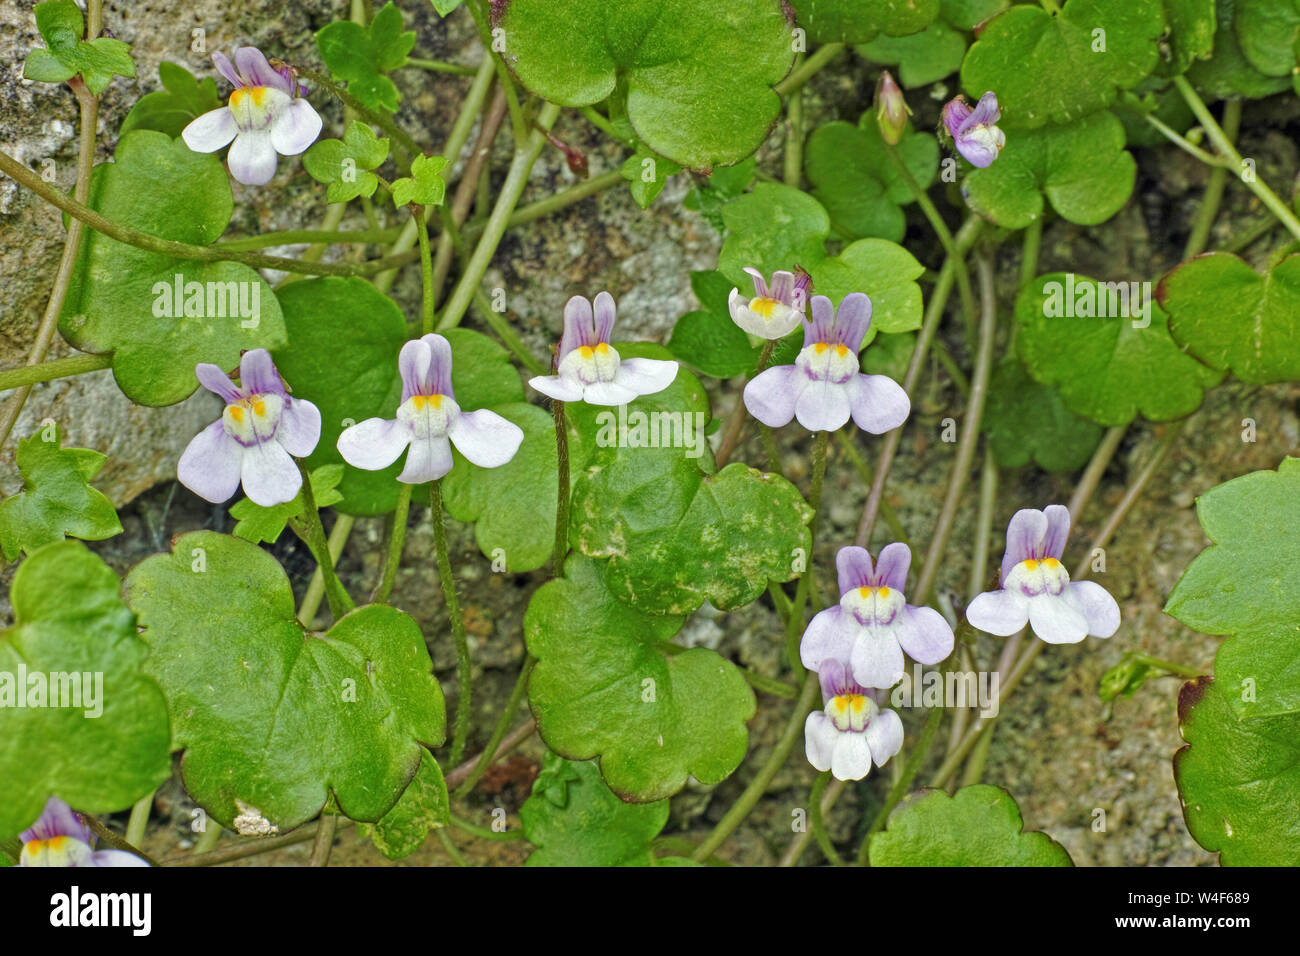 plant of ivy-leaved toadflax in bloom, Stock Photo